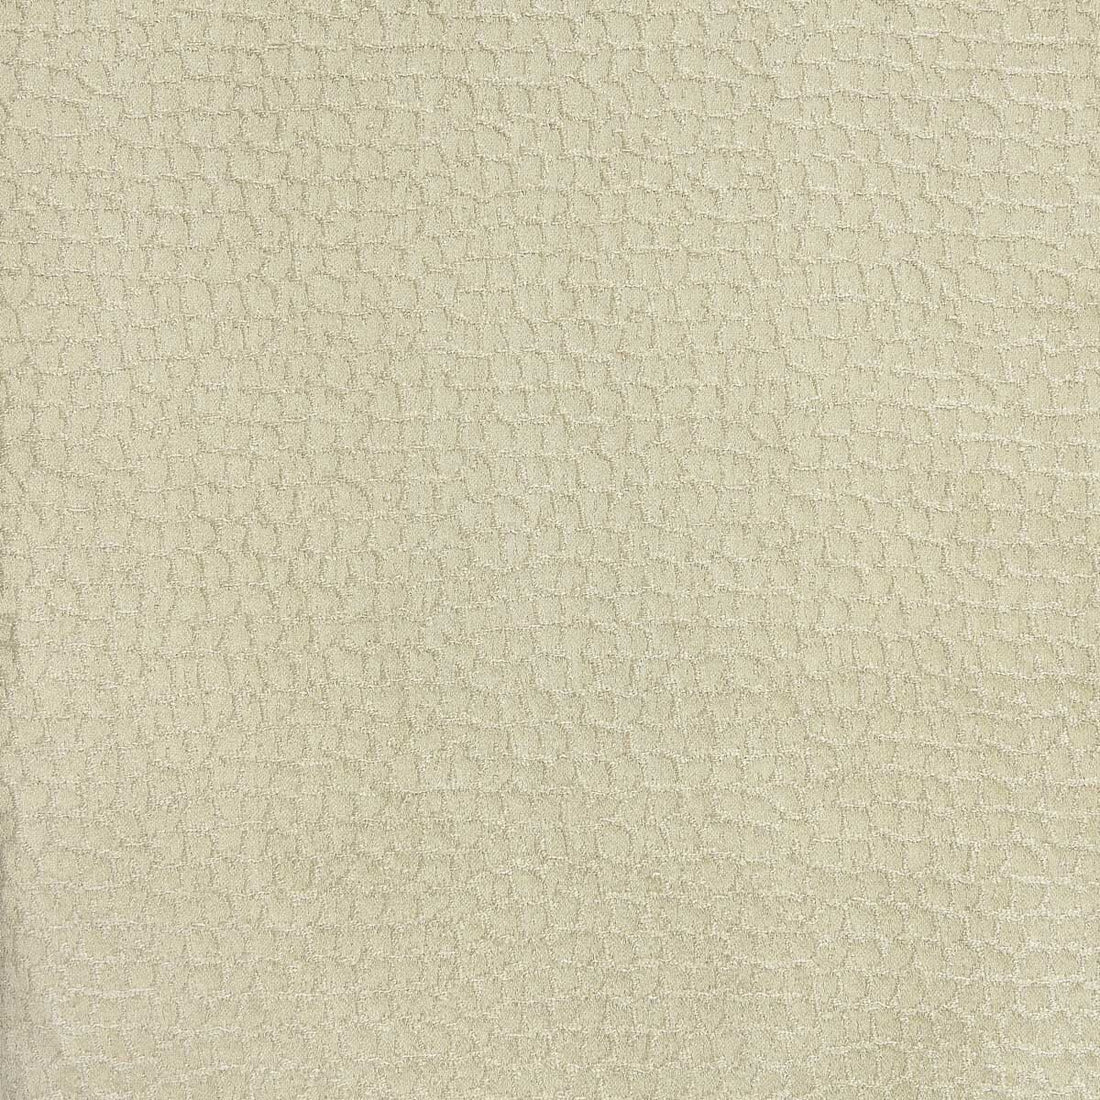 Gaudi fabric in 6 color - pattern LZ-30410.06.0 - by Kravet Couture in the Lizzo collection